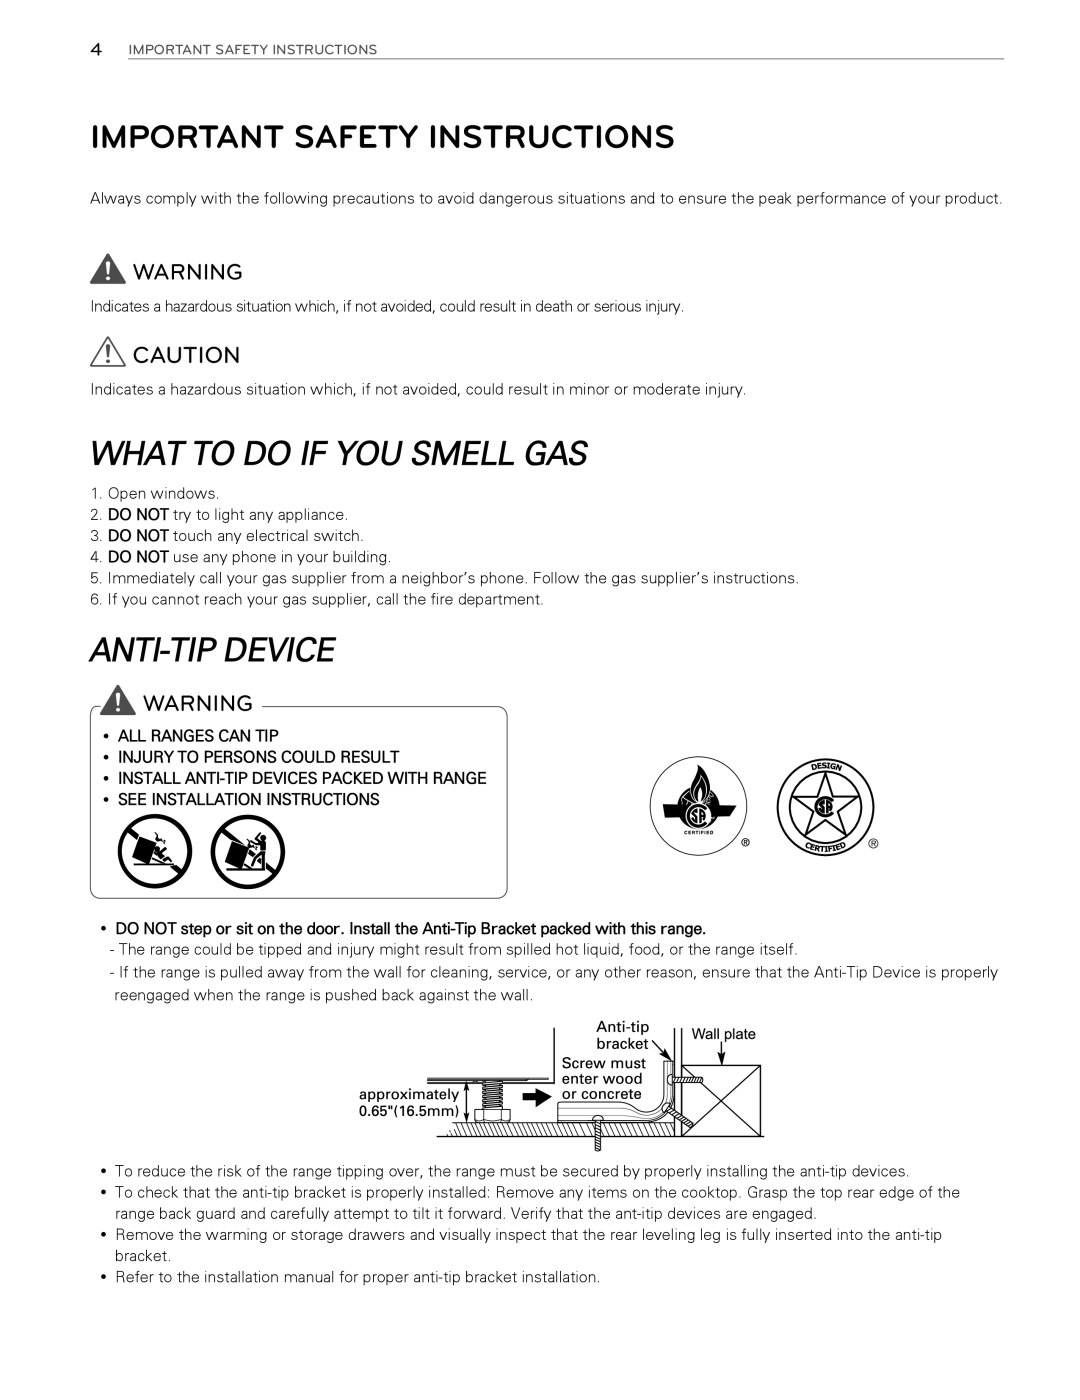 LG Electronics LDG3016ST Important Safety Instructions, What To Do If You Smell Gas, Anti-Tipdevice, yy ALL RANGES CAN TIP 